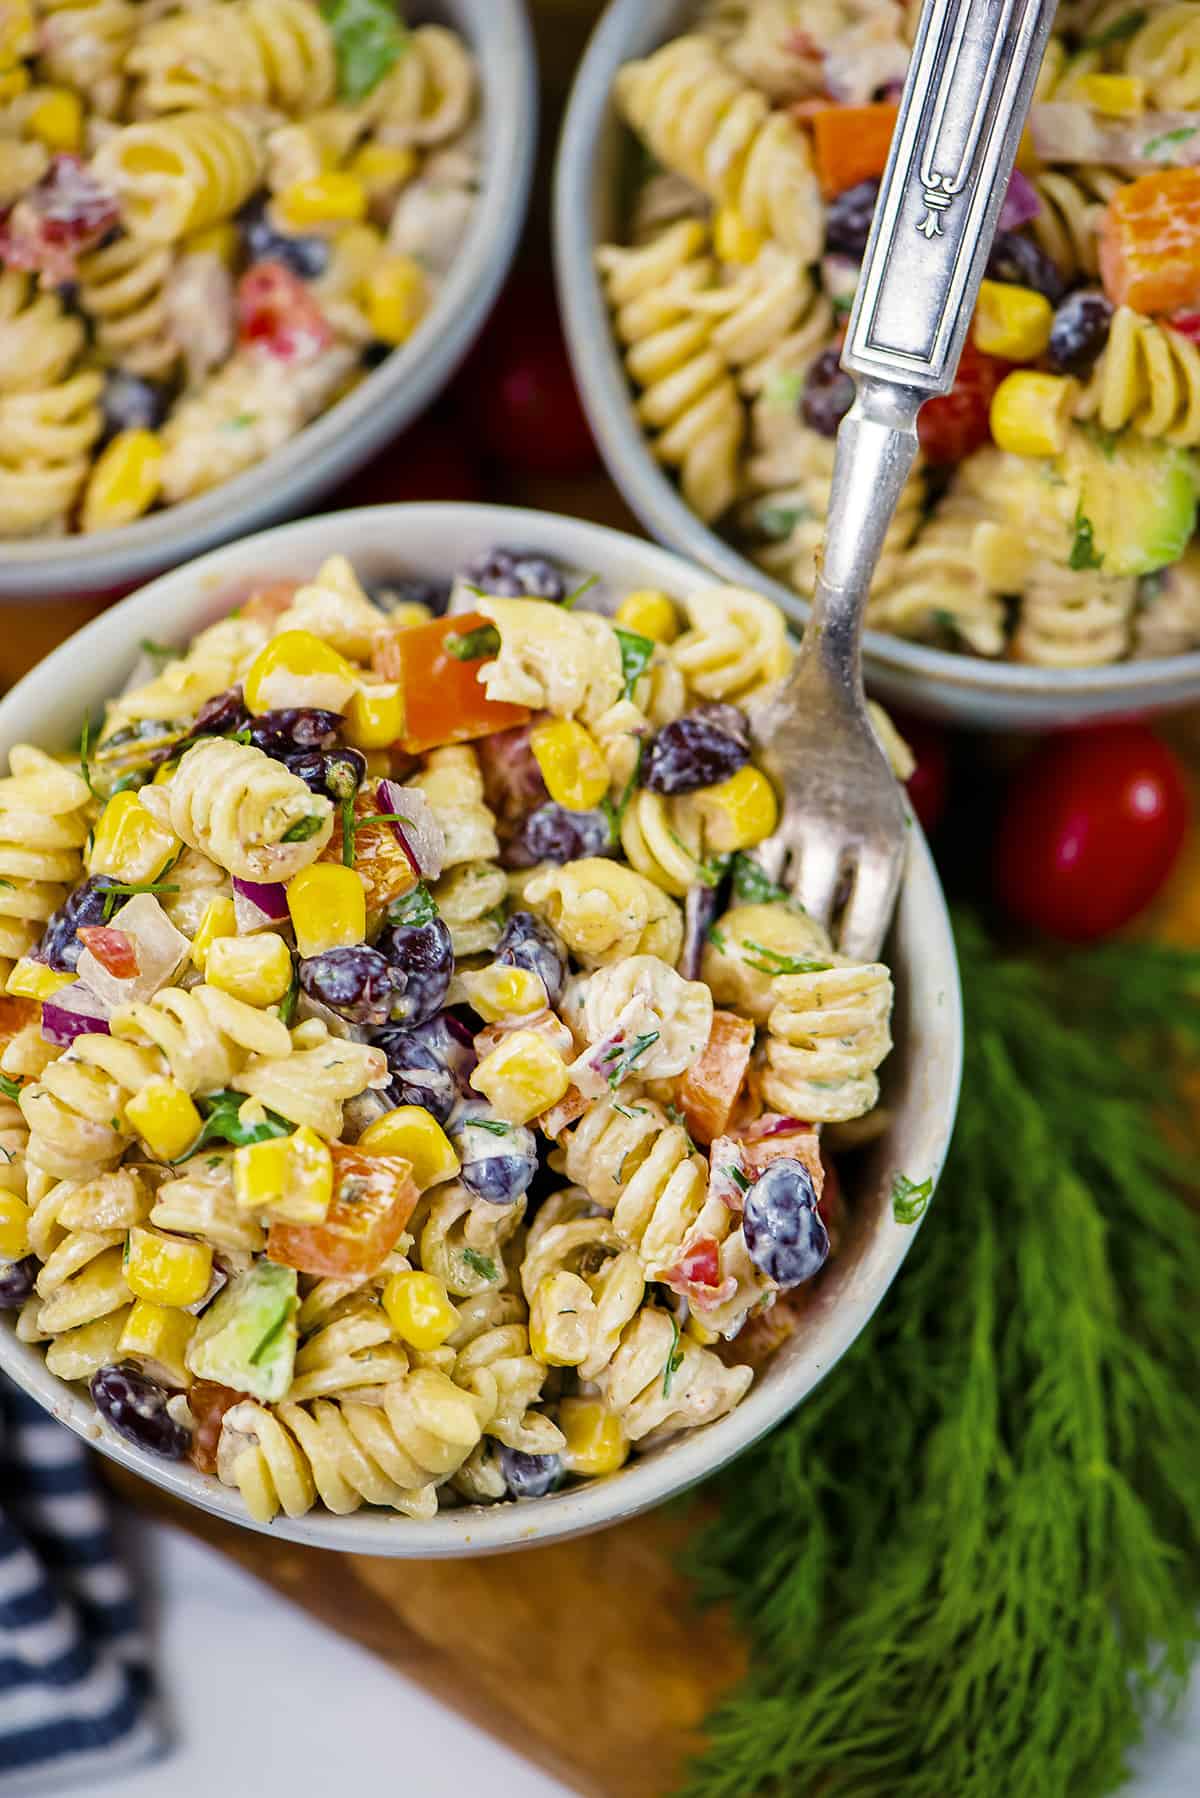 Pasta salad in white bowl with fork.